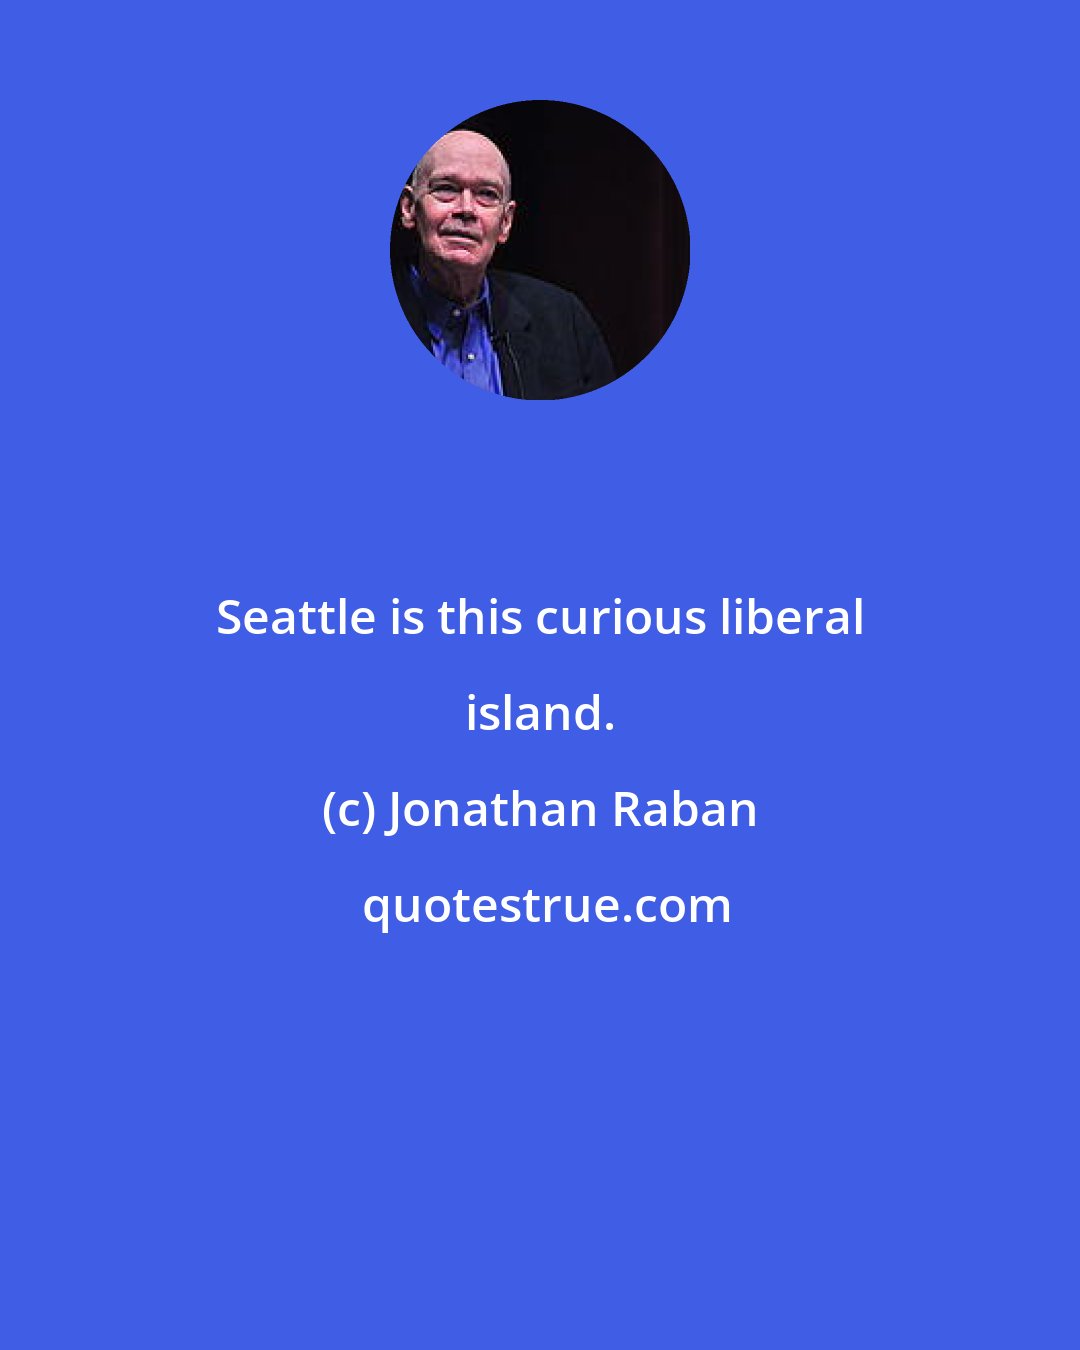 Jonathan Raban: Seattle is this curious liberal island.